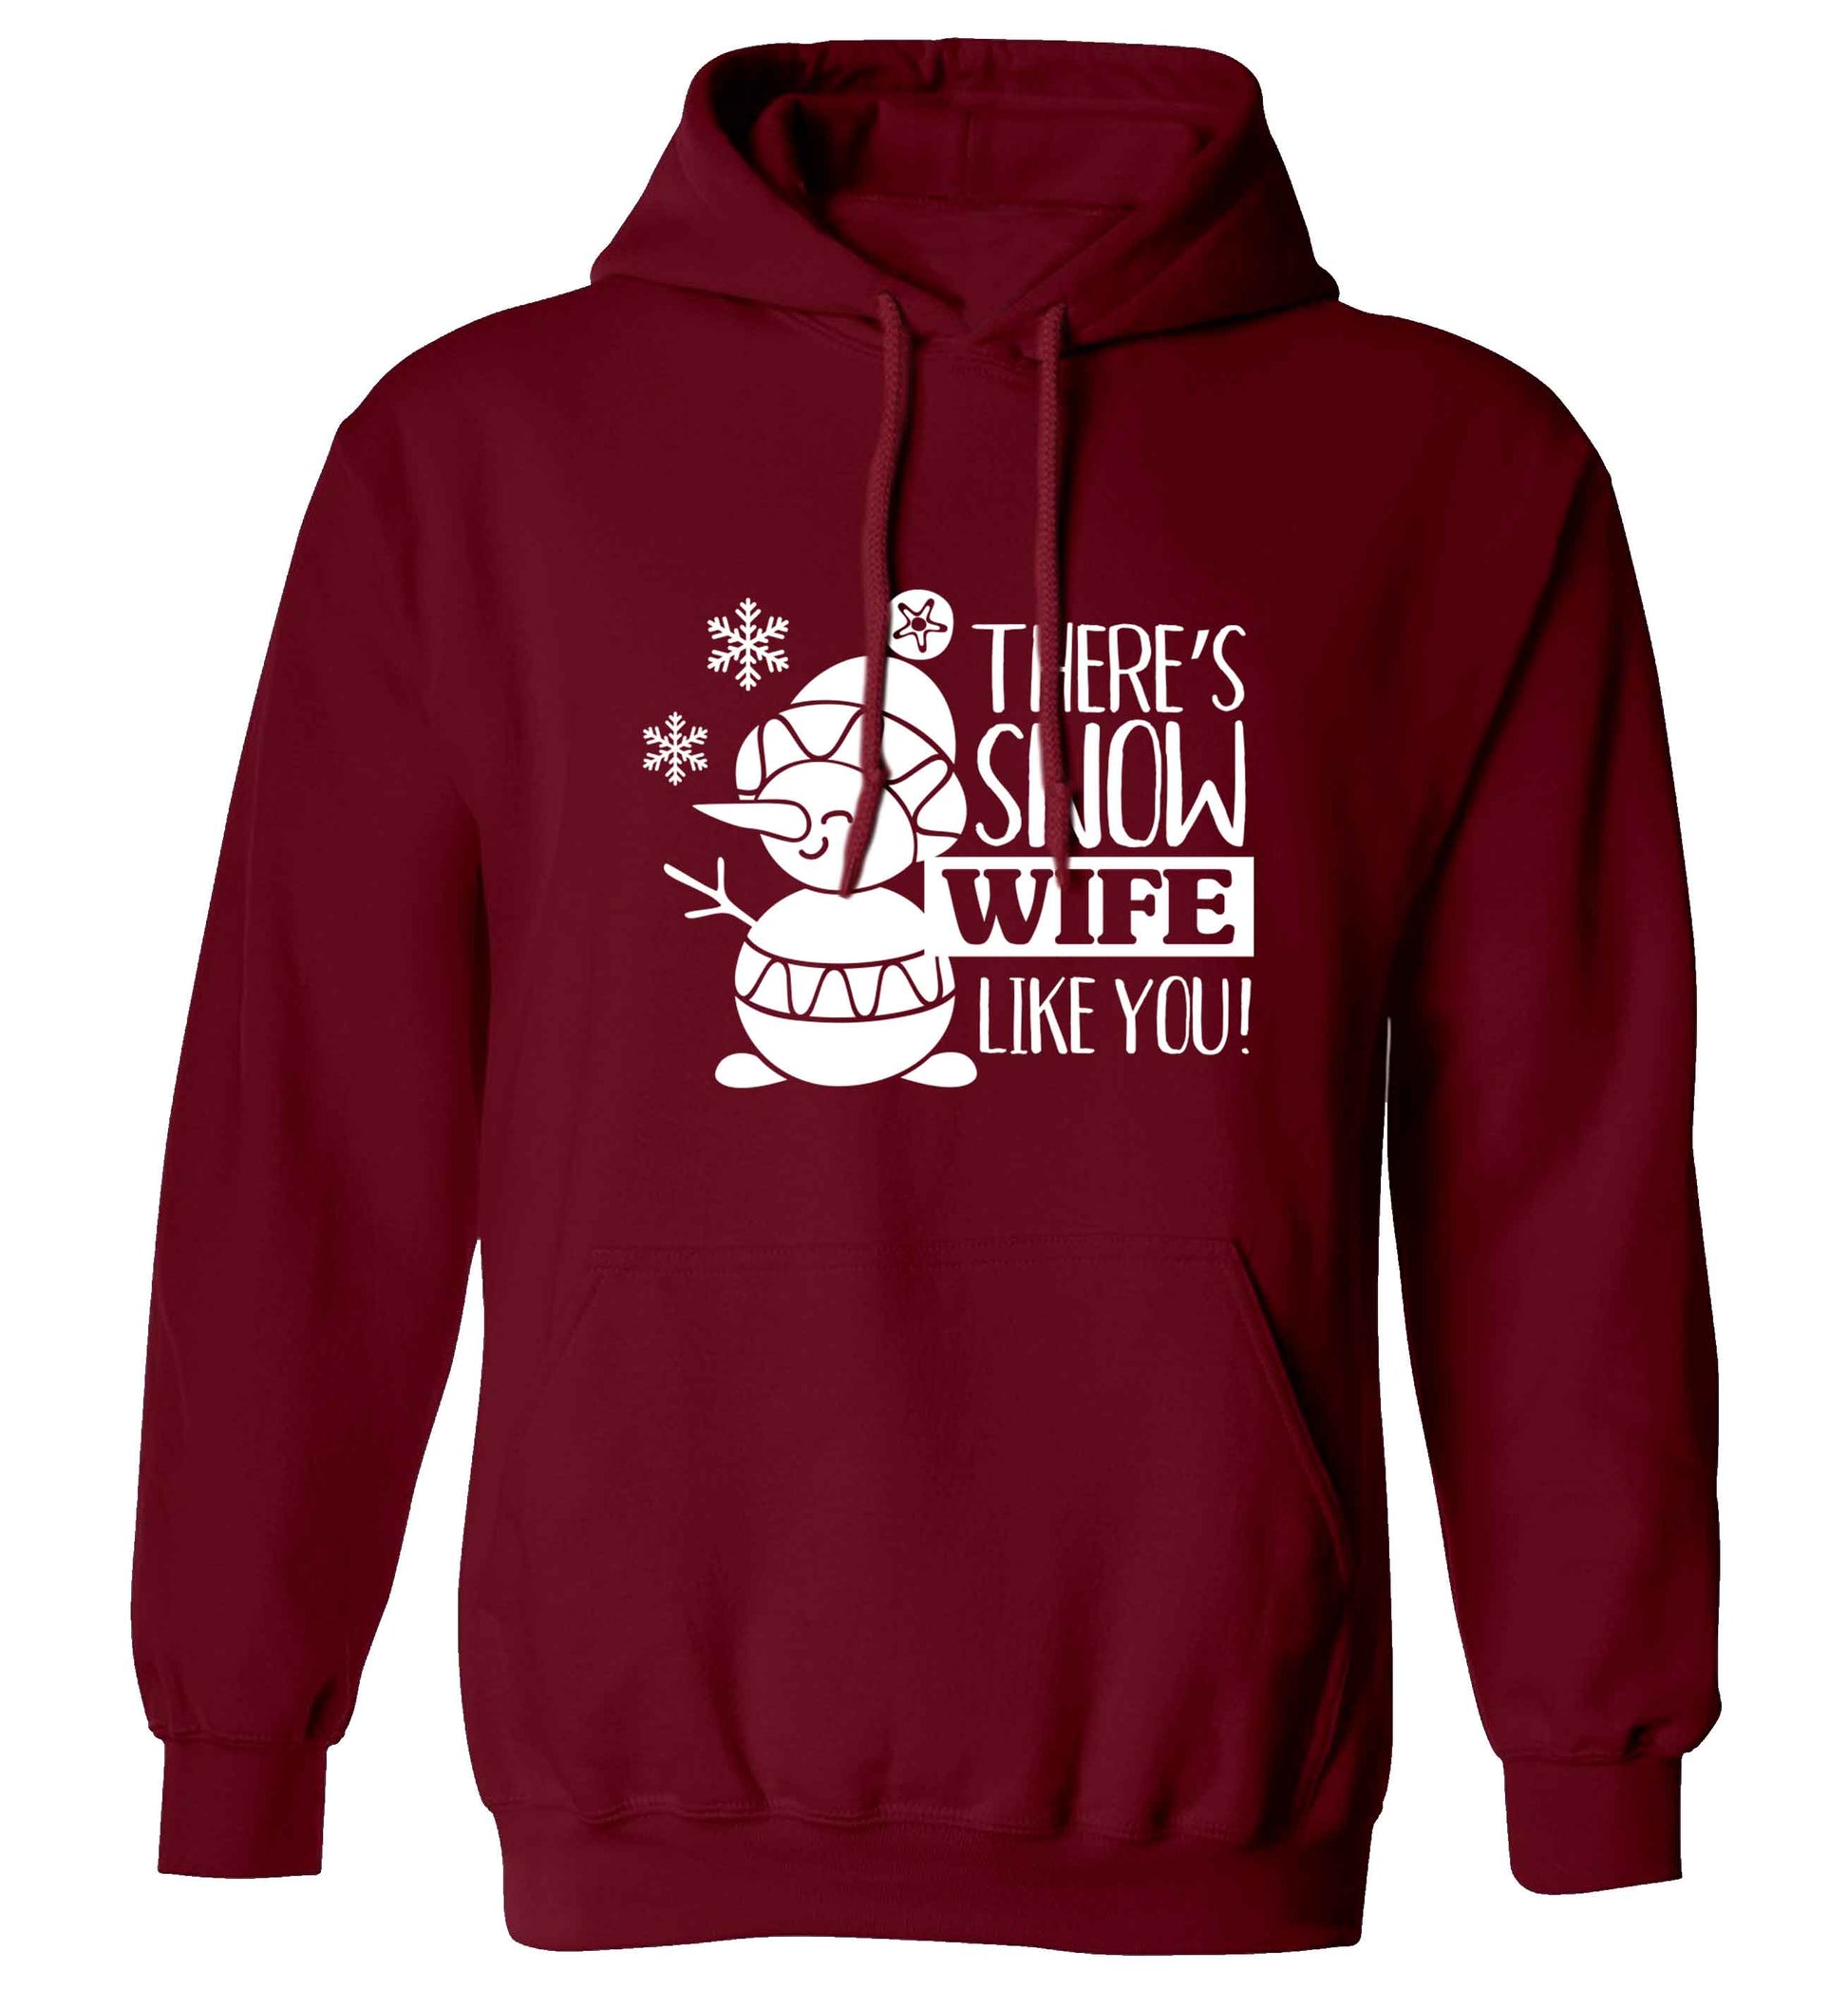 There's snow wife like you adults unisex maroon hoodie 2XL